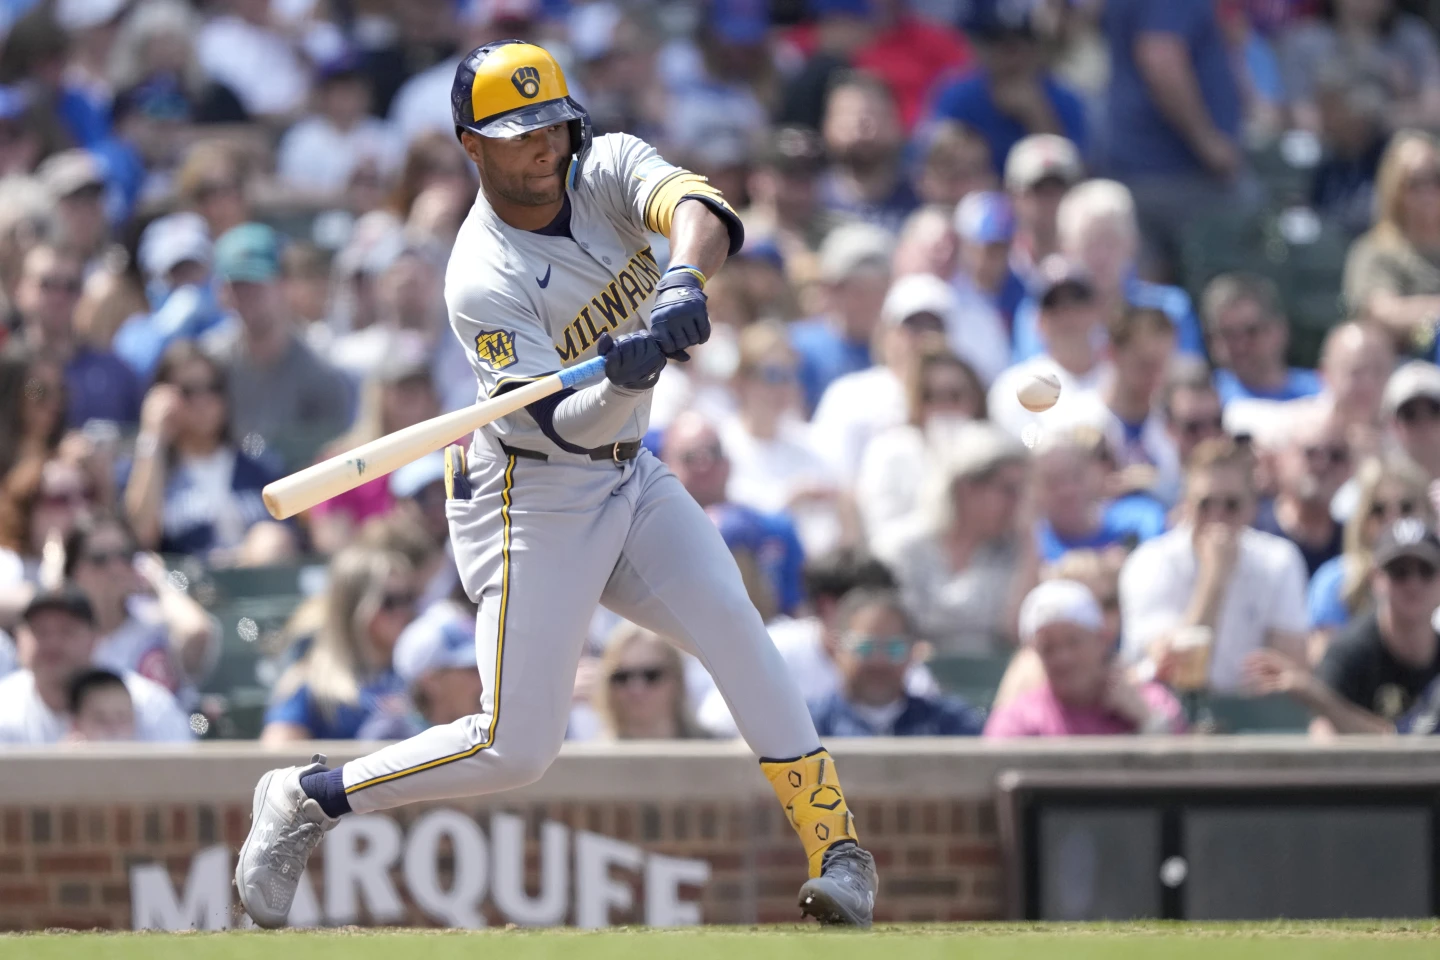 The Chicago Cubs blasted three home runs and halted a late Milwaukee Brewers comeback in a 6-5 victory - Sports Al Dente